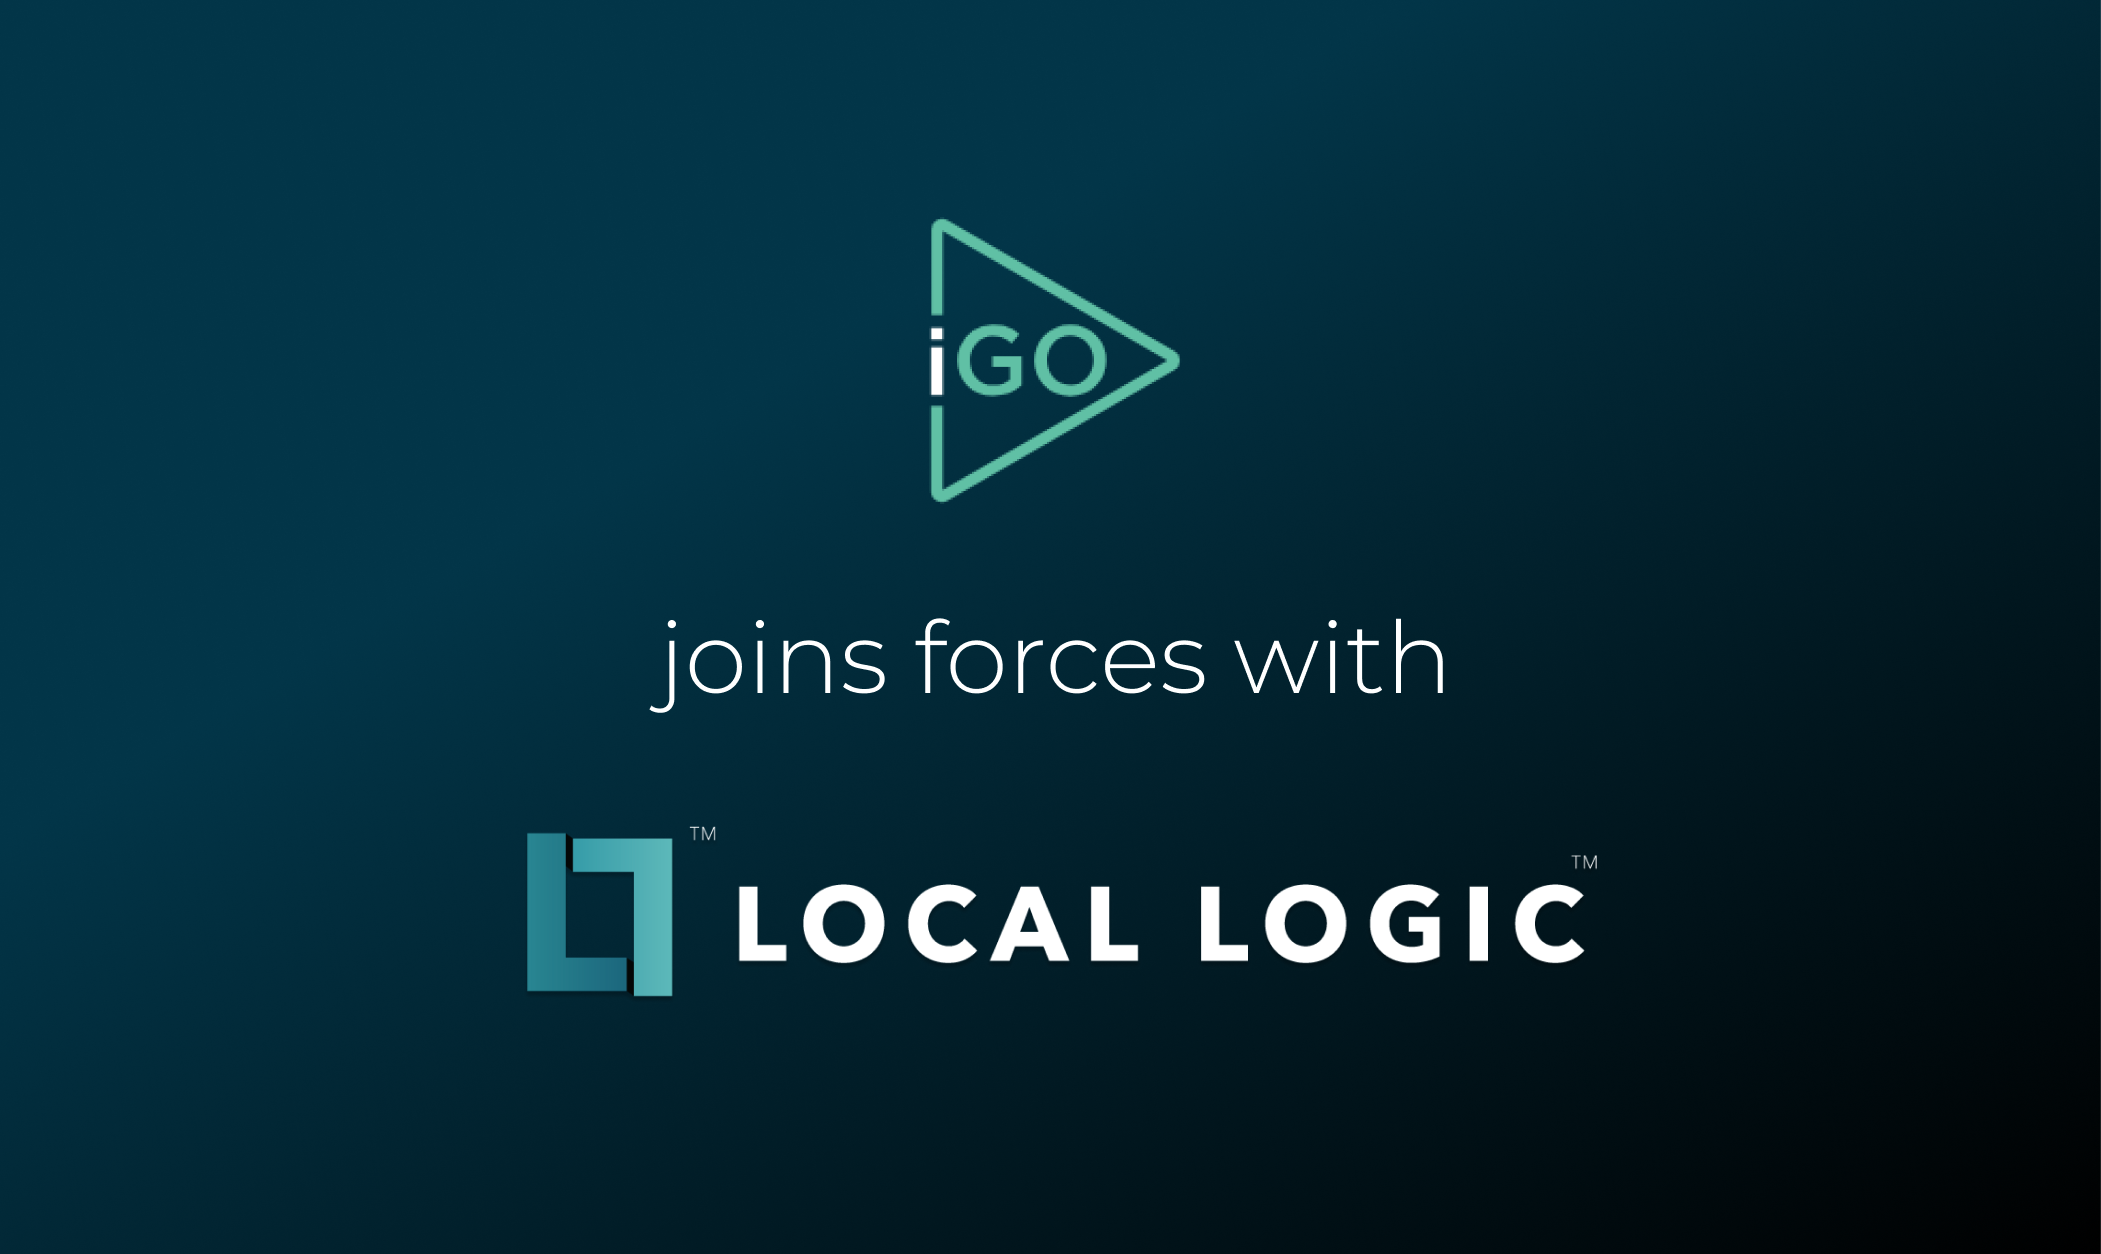 Logo of iGo on top of text "joins force with" followed by Local Logic logo to announce new partnership between InspectionGo and Local Logic